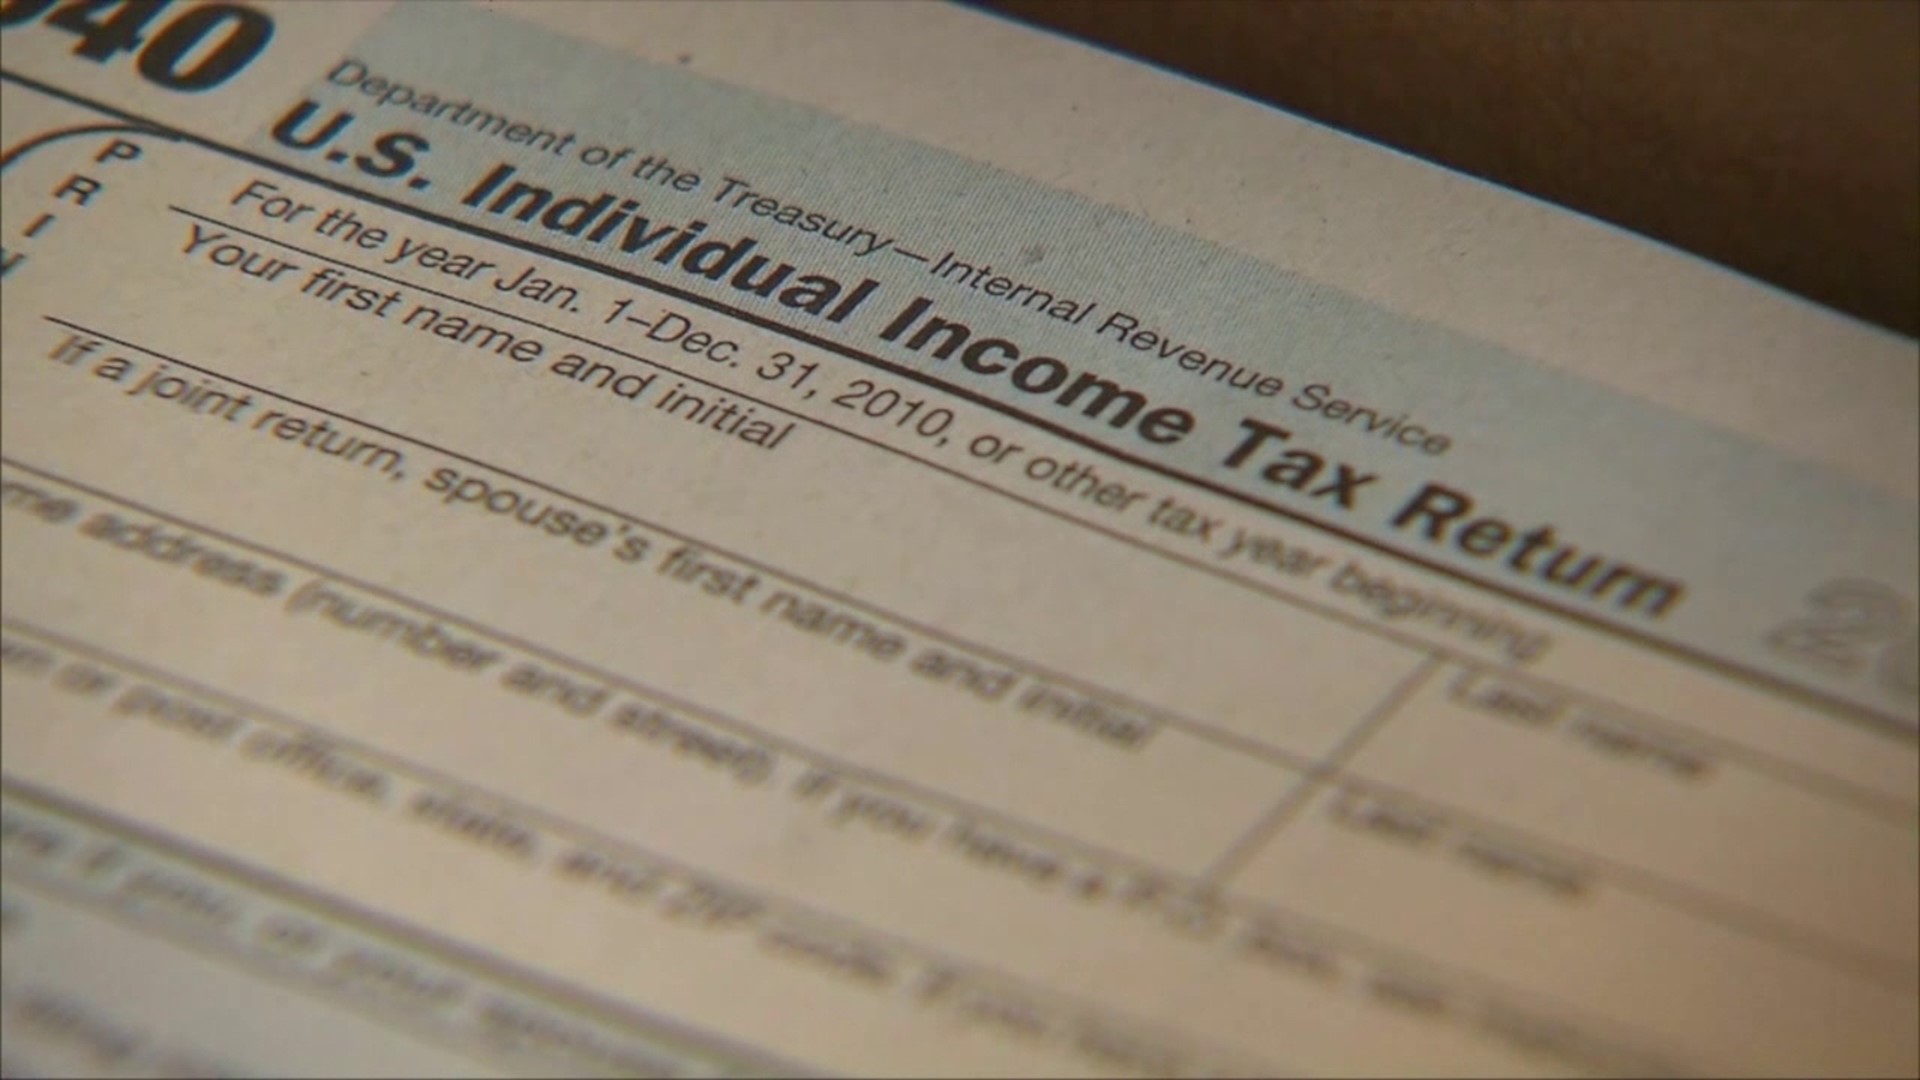 Tax season is upon us, and it could be a messy one. There's a massive backlog at the IRS. Here's the lowdown on what to expect from an accountant in Scranton.